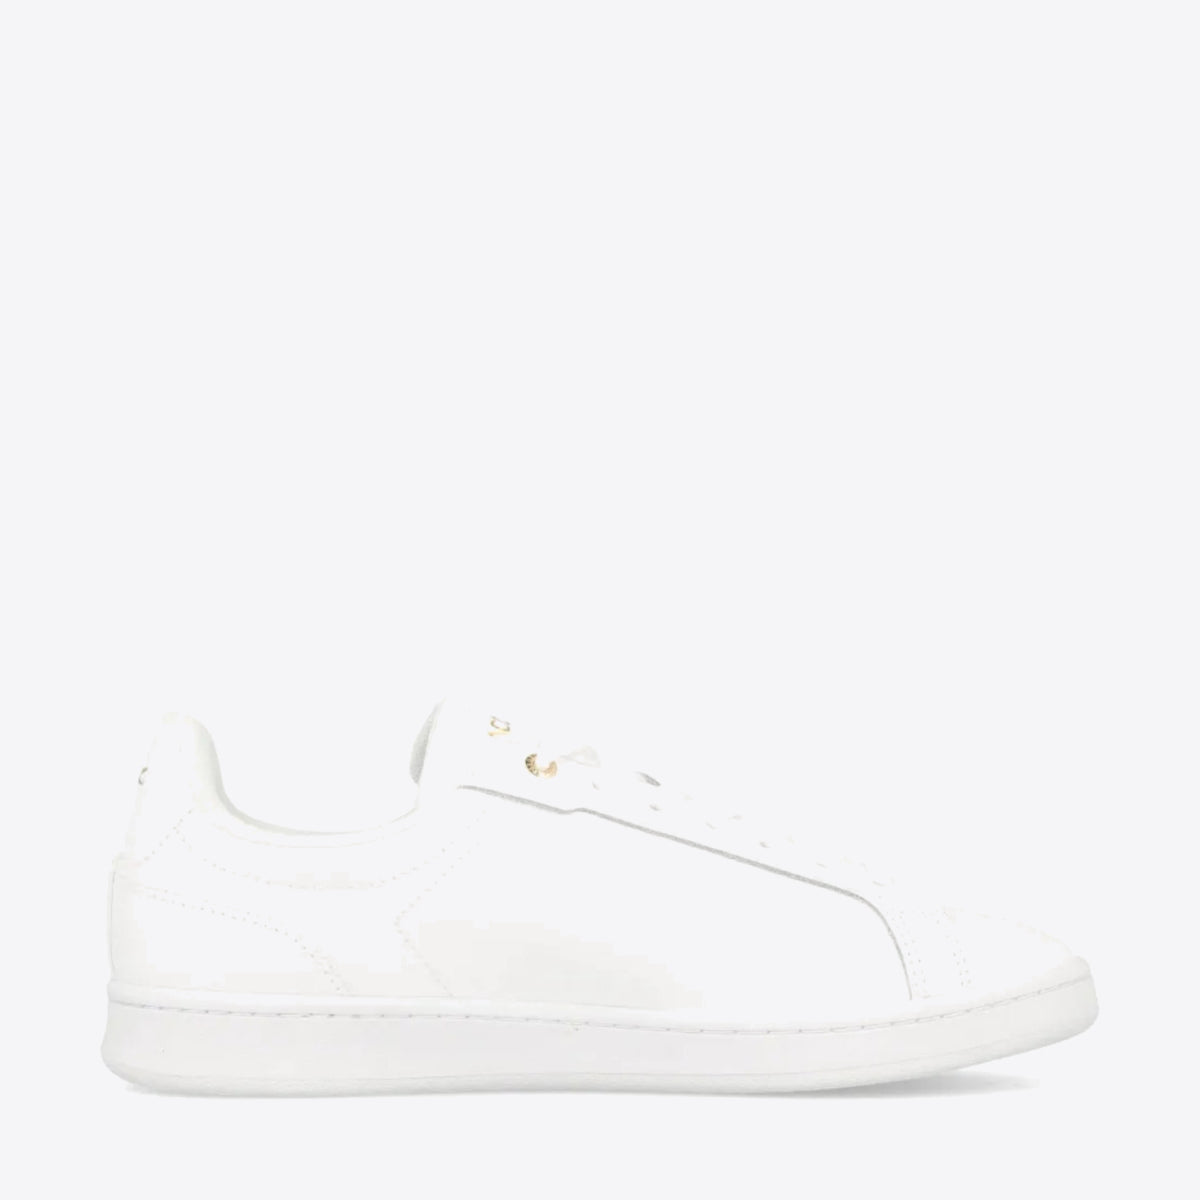 LACOSTE Carnaby Pro White - Image 1